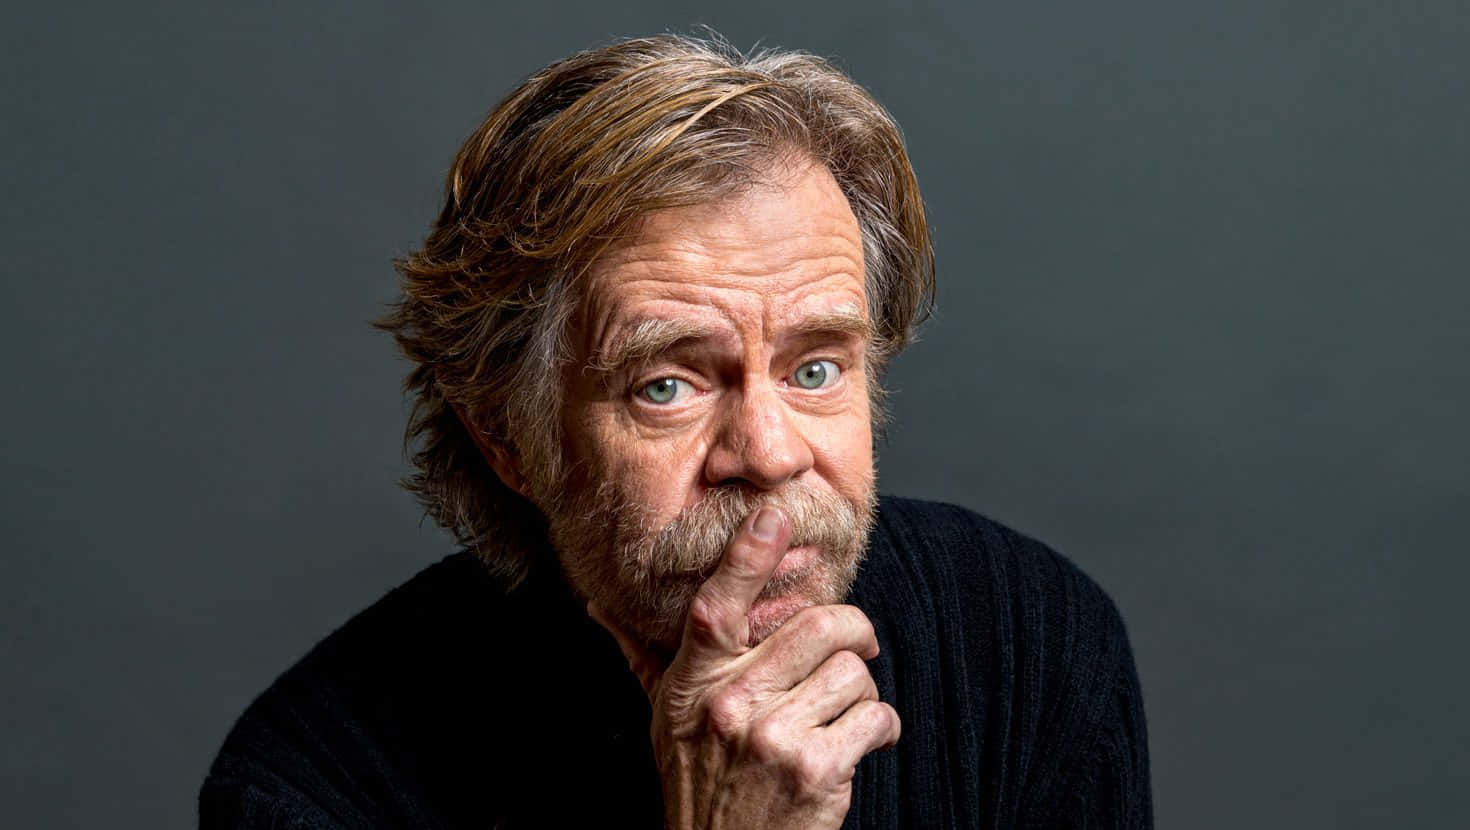 Award-winning Actor William H. Macy Posing For A Portrait.